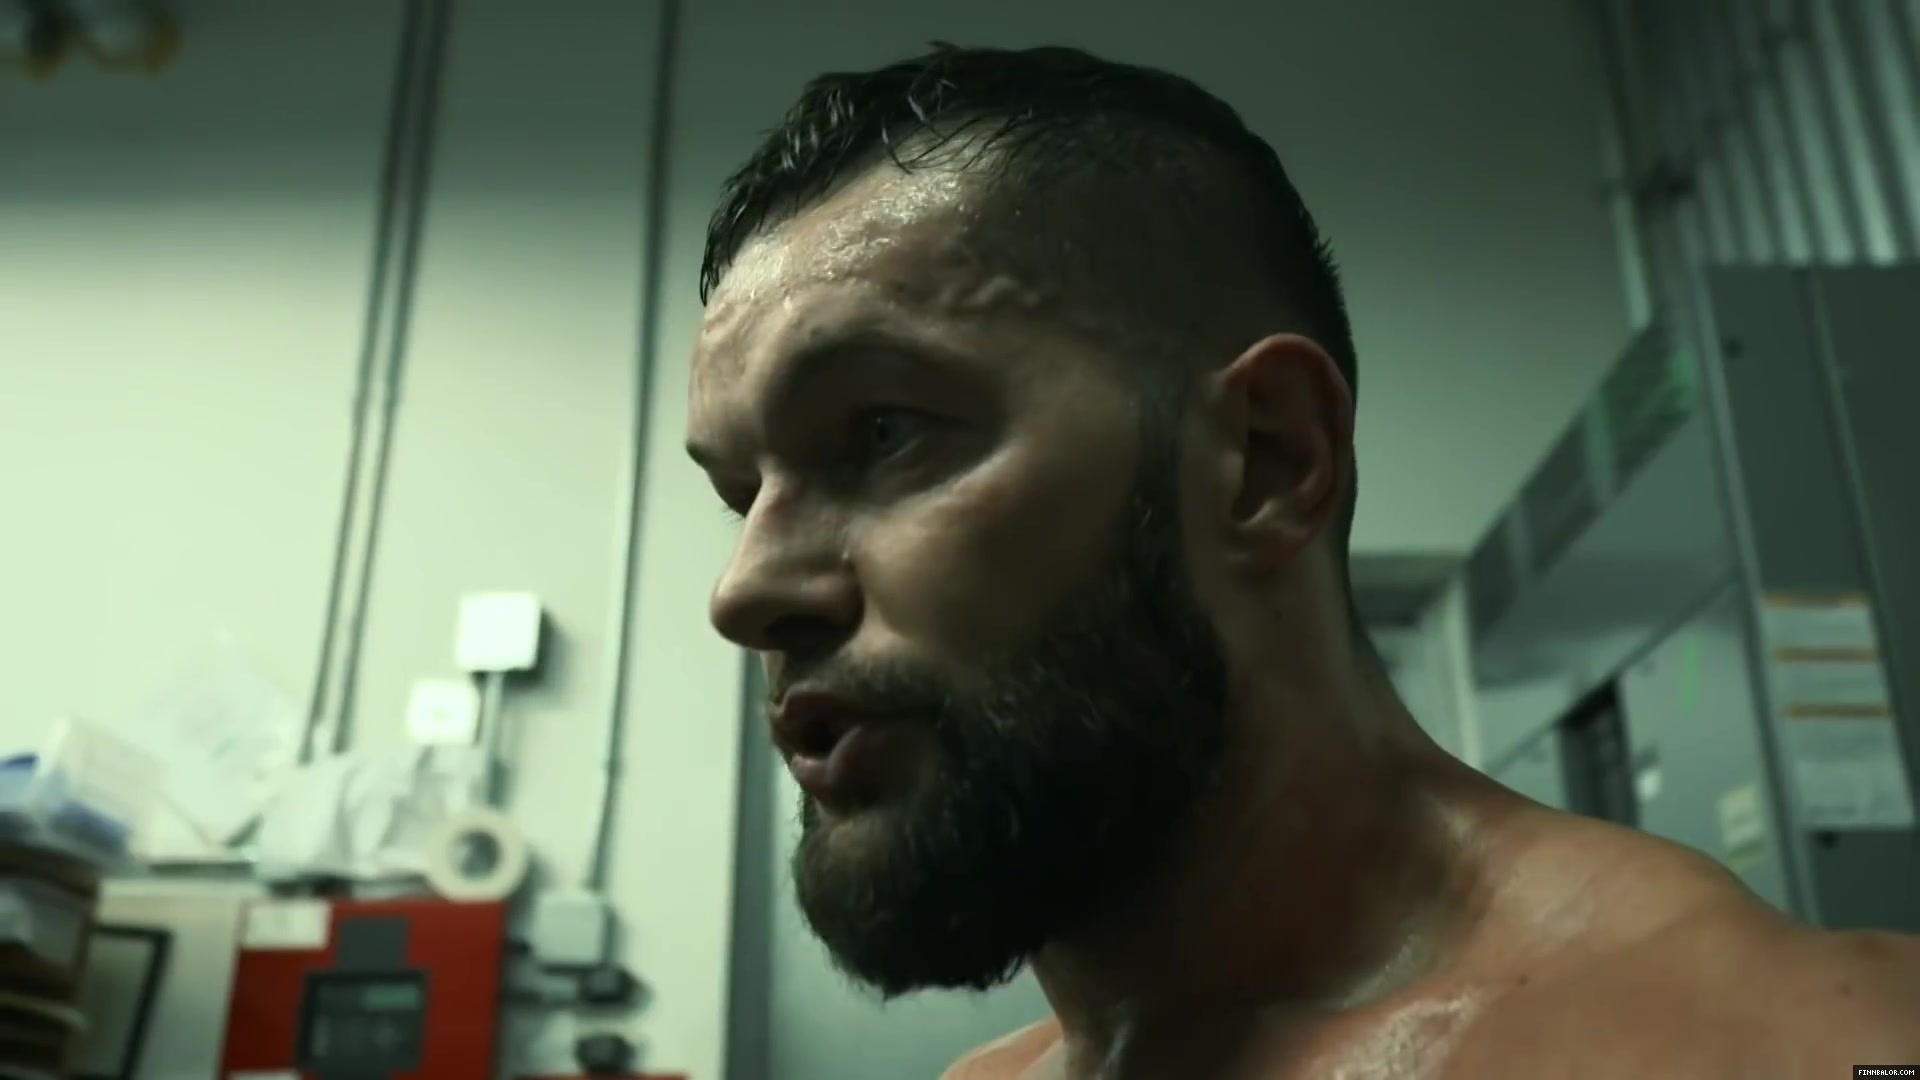 Finn_Balor___The_Rising_of_the_Prince_in_NXT_252.jpg